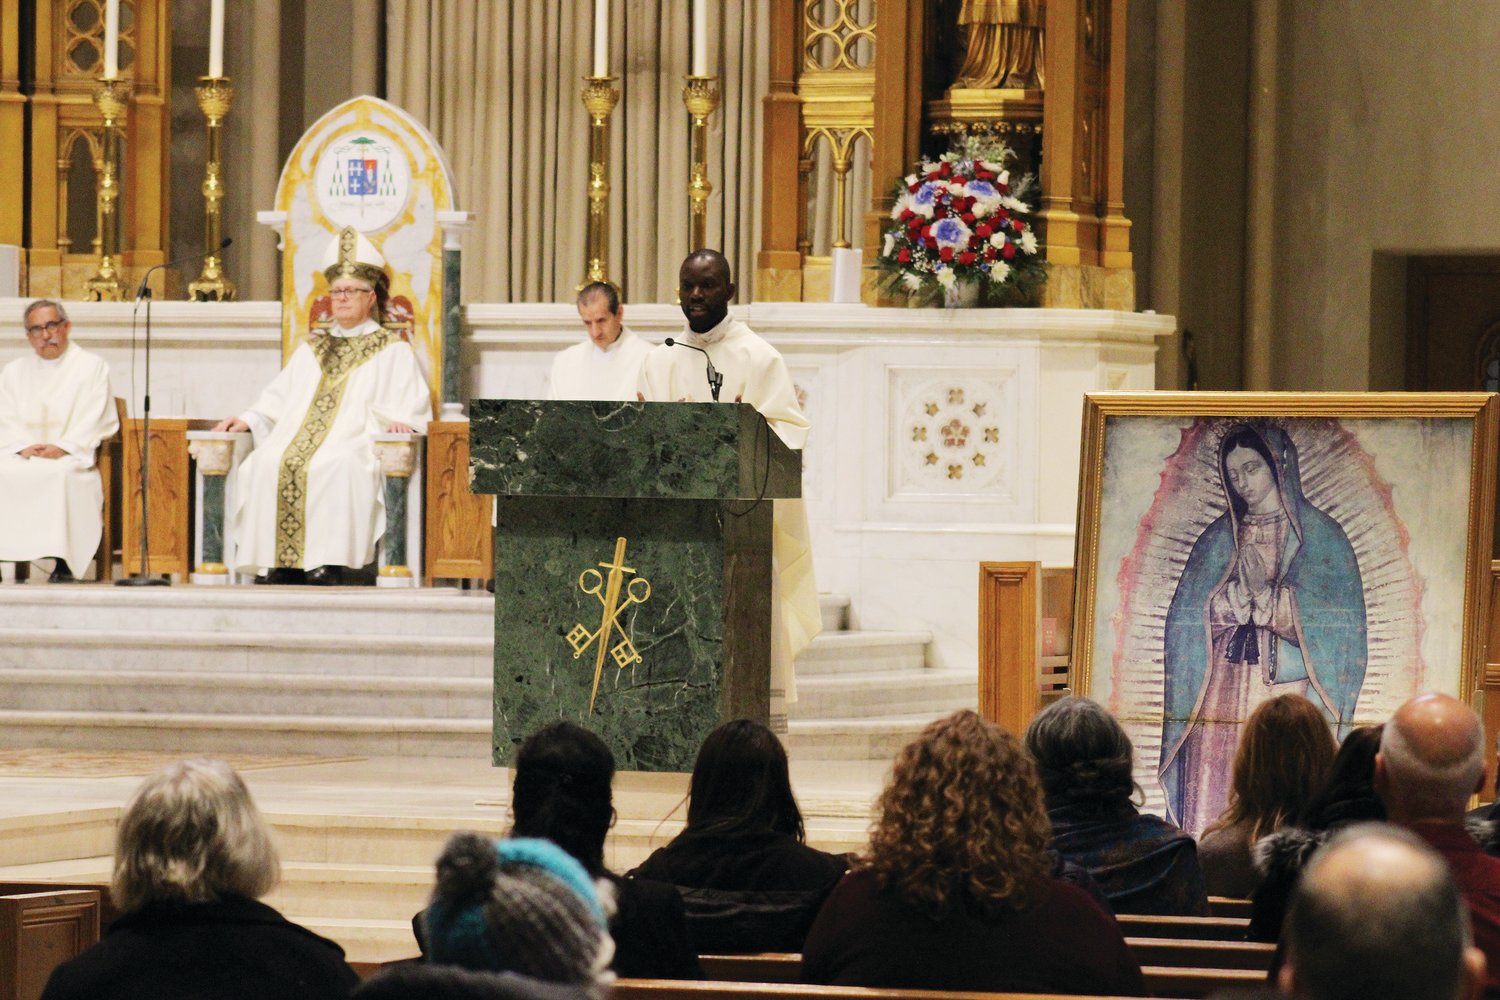 The diocesan Office of Life and Family Ministry sponsored a Holy Mass for Life, in Thanksgiving for the gift of life, on Saturday, Jan. 21, in the Cathedral of SS. Peter and Paul. Bishop Thomas J. Tobin served as the main celebrant and Father J. Joseph Brice, was the homilist.